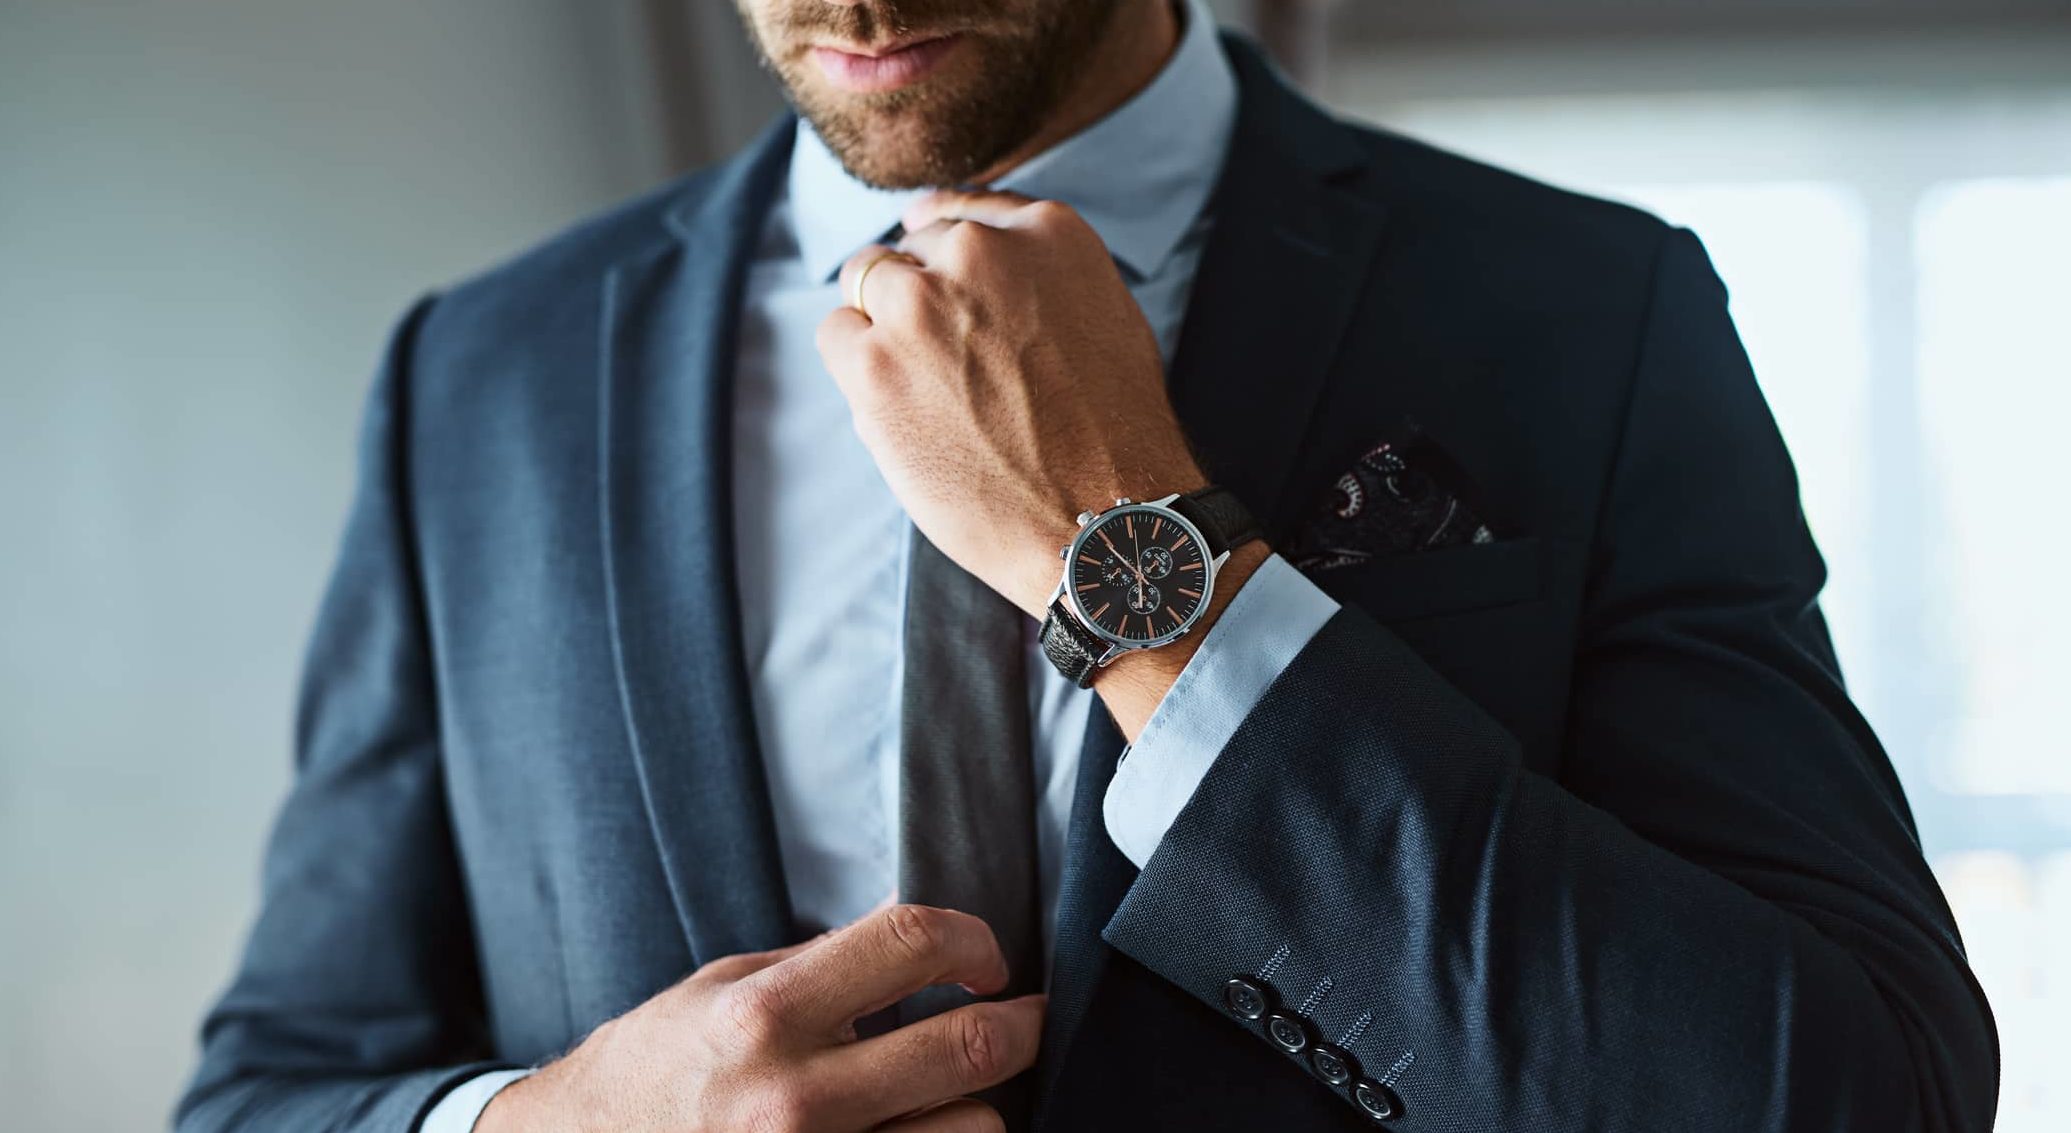 Affordable Men’s Fashion for Real Estate: The Ultimate Guide for 2022